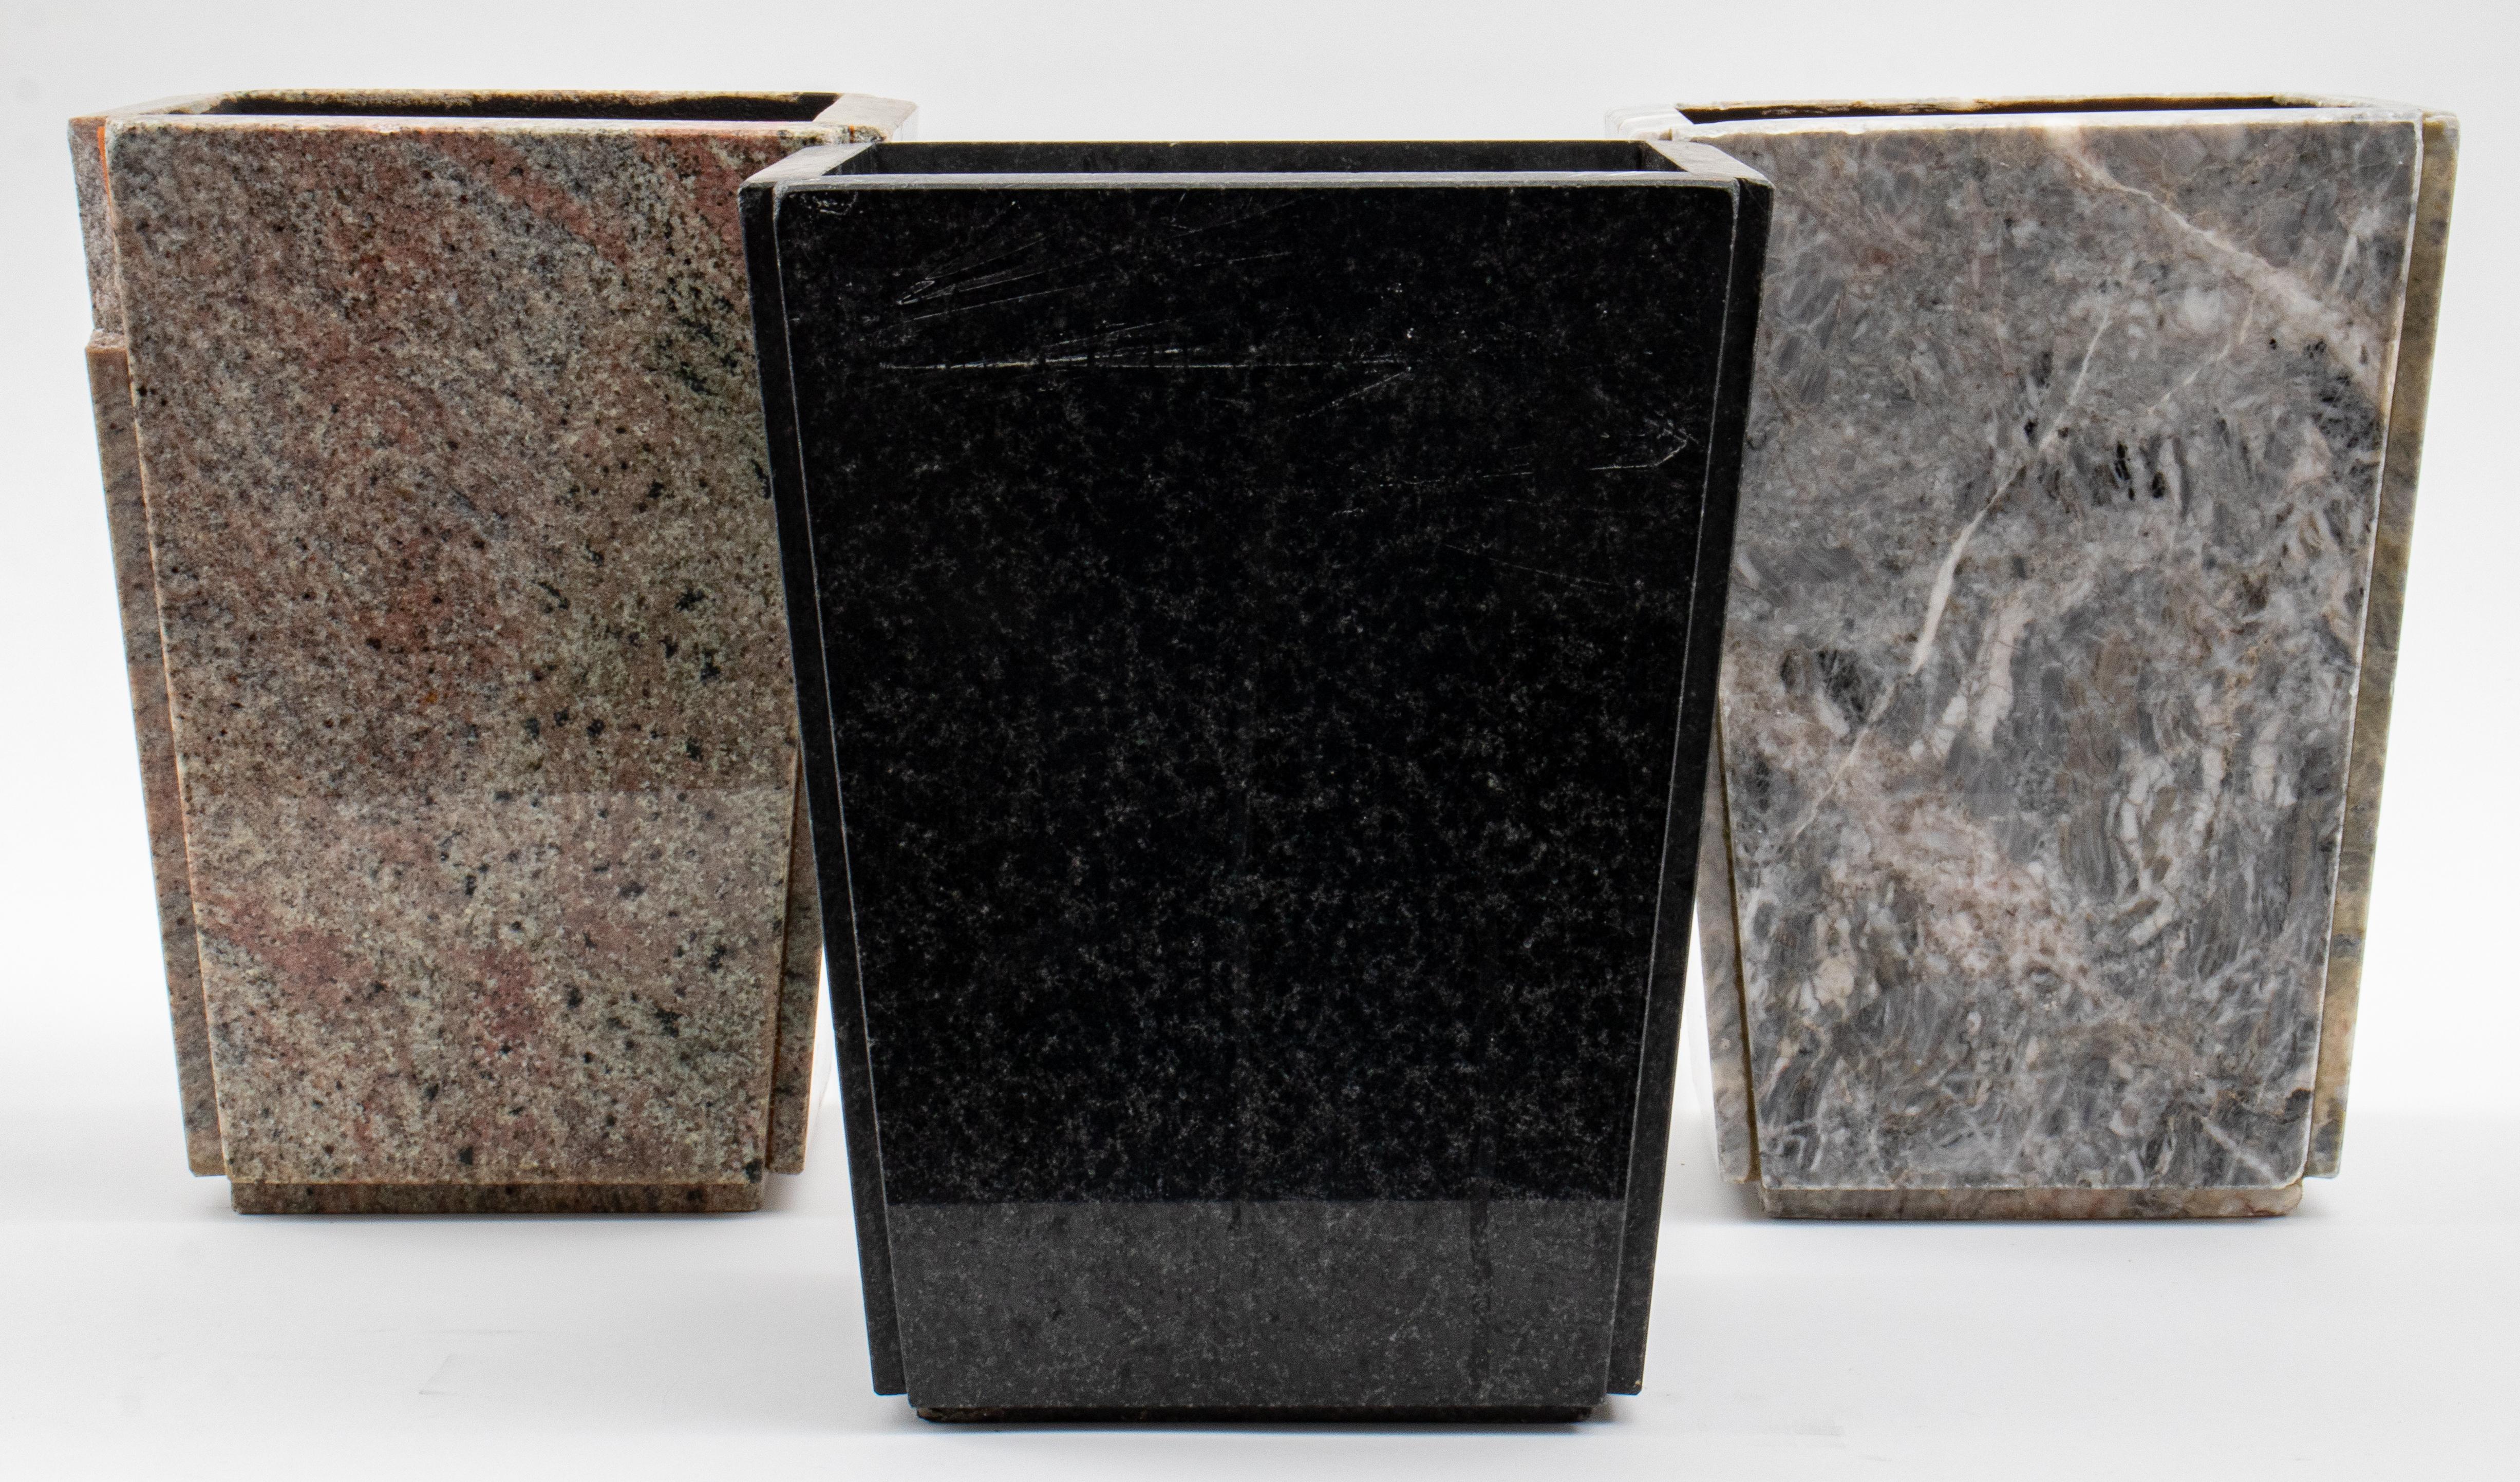 Three hardstone mounted planters or bathroom trash cans, of tapered rectangular form, one black granite, one mottled gray and red possibly marble, and one gray marble. 11.75